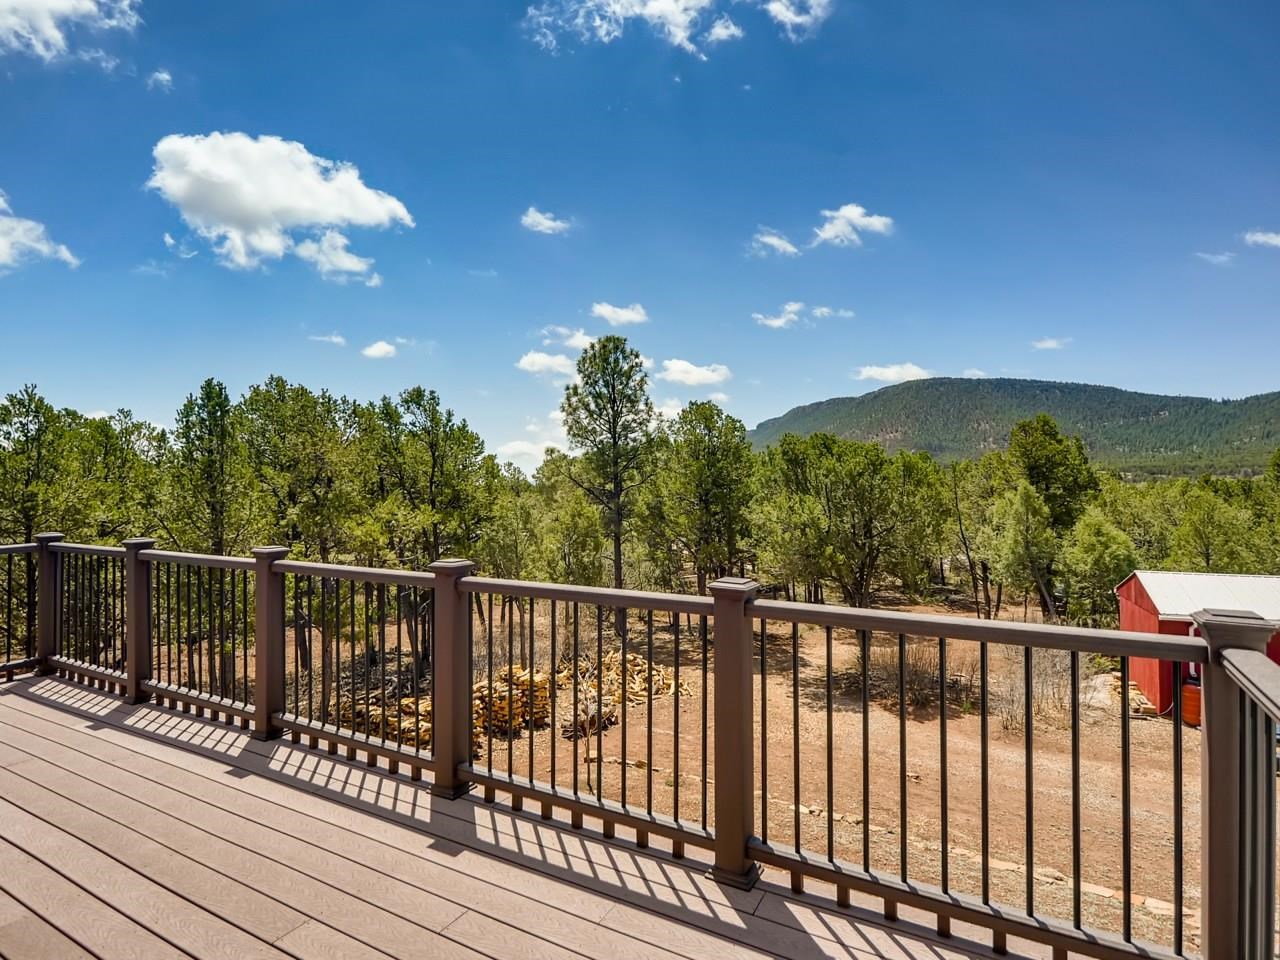 41 Trail, Glorieta, New Mexico 87535, 3 Bedrooms Bedrooms, ,4 BathroomsBathrooms,Residential,For Sale,41 Trail,202101912